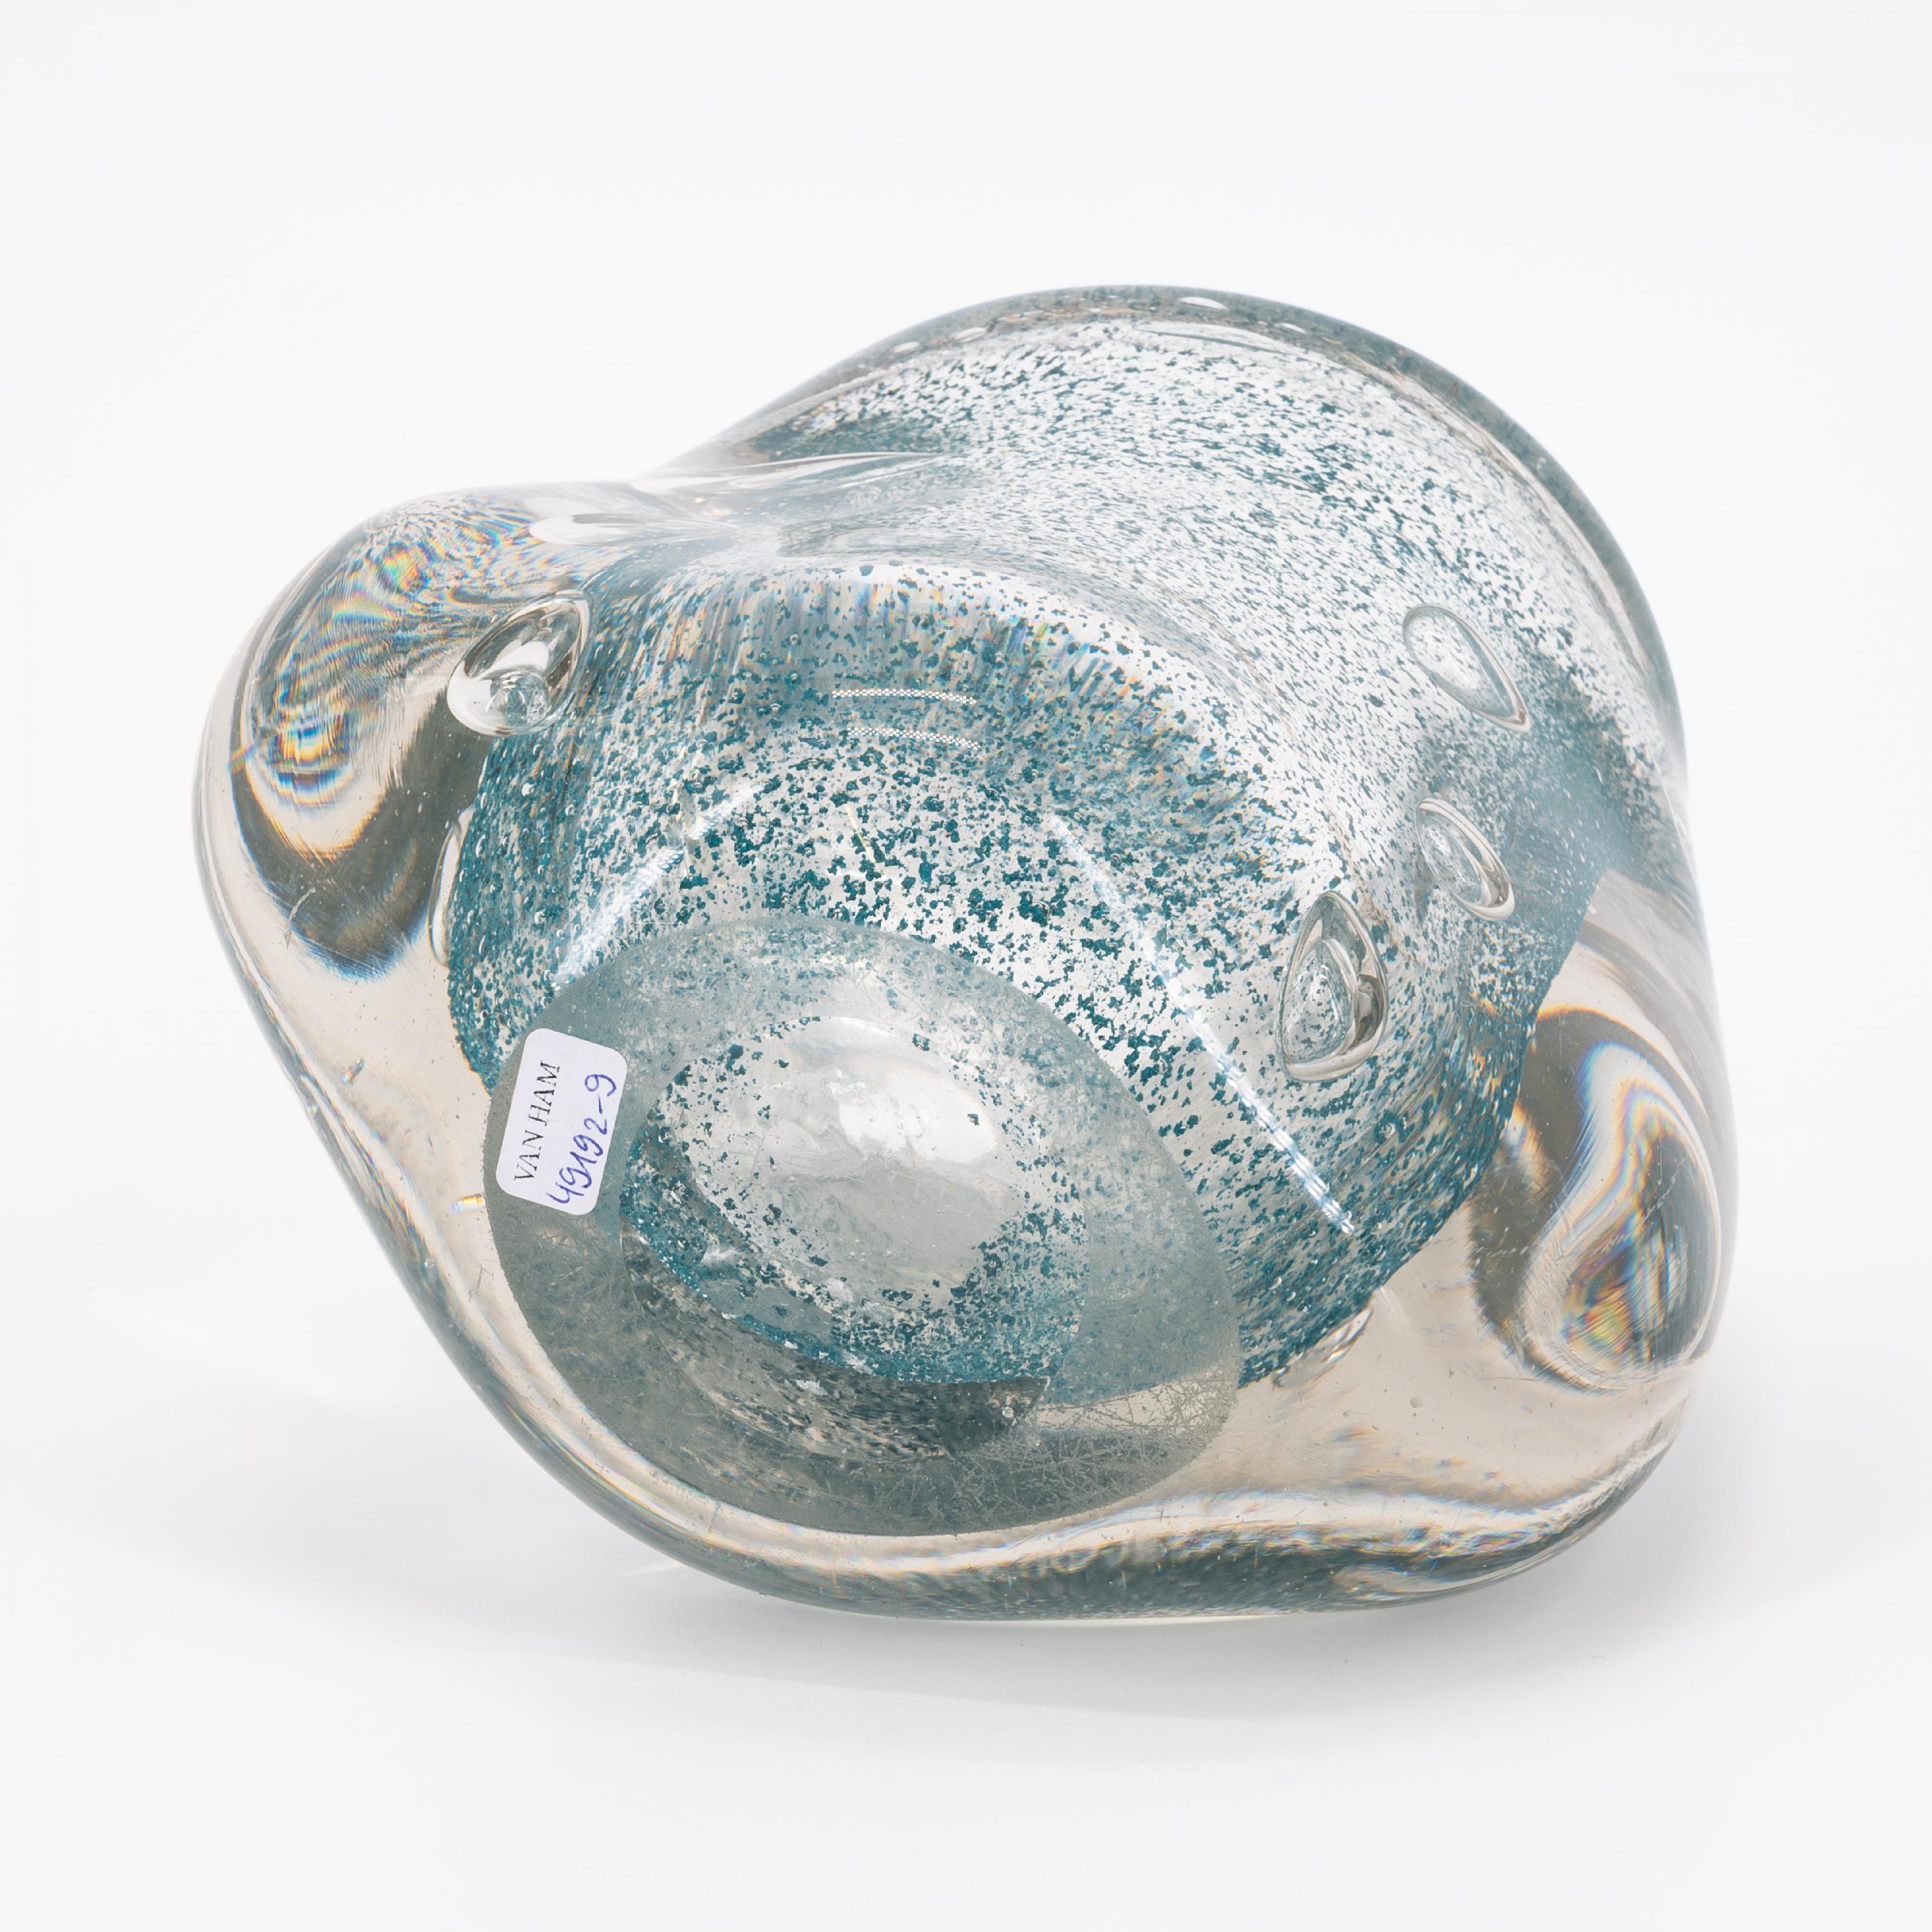 GLASS VASE WITH TURQUOISE BLUE POWDER INCLUSIONS - Image 6 of 6